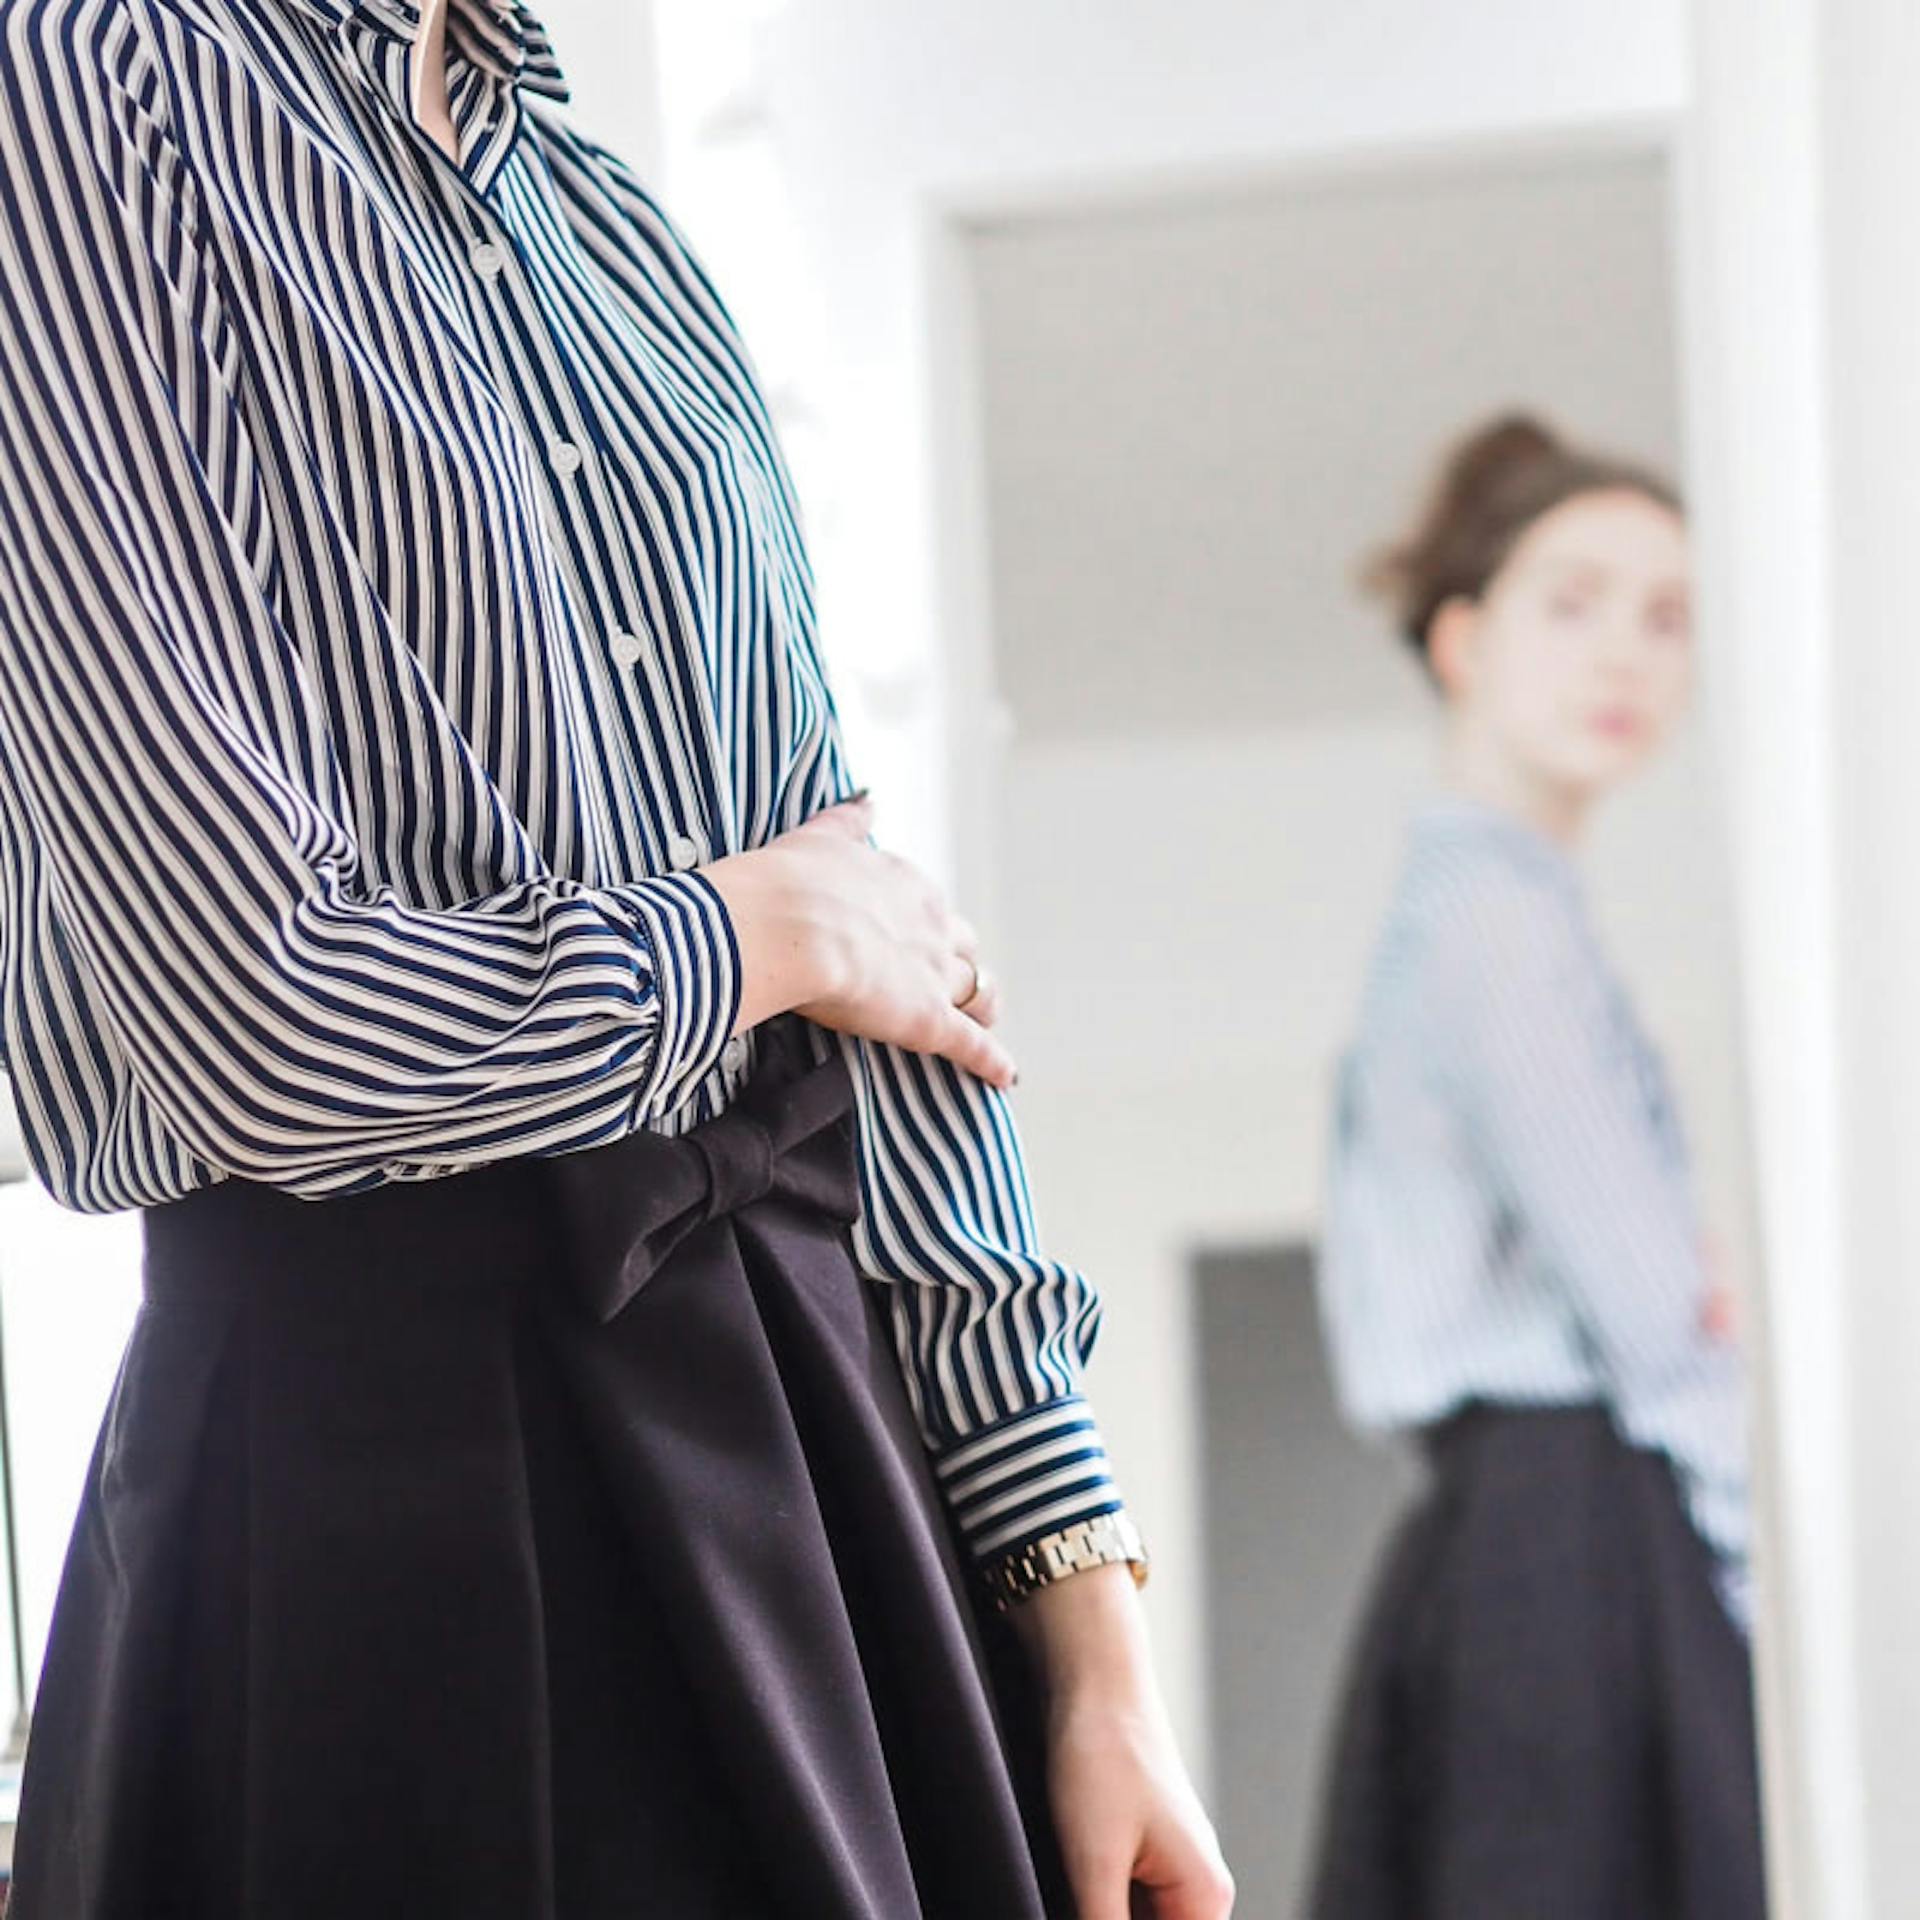 A woman self-consciously observes her outfit in the mirror.